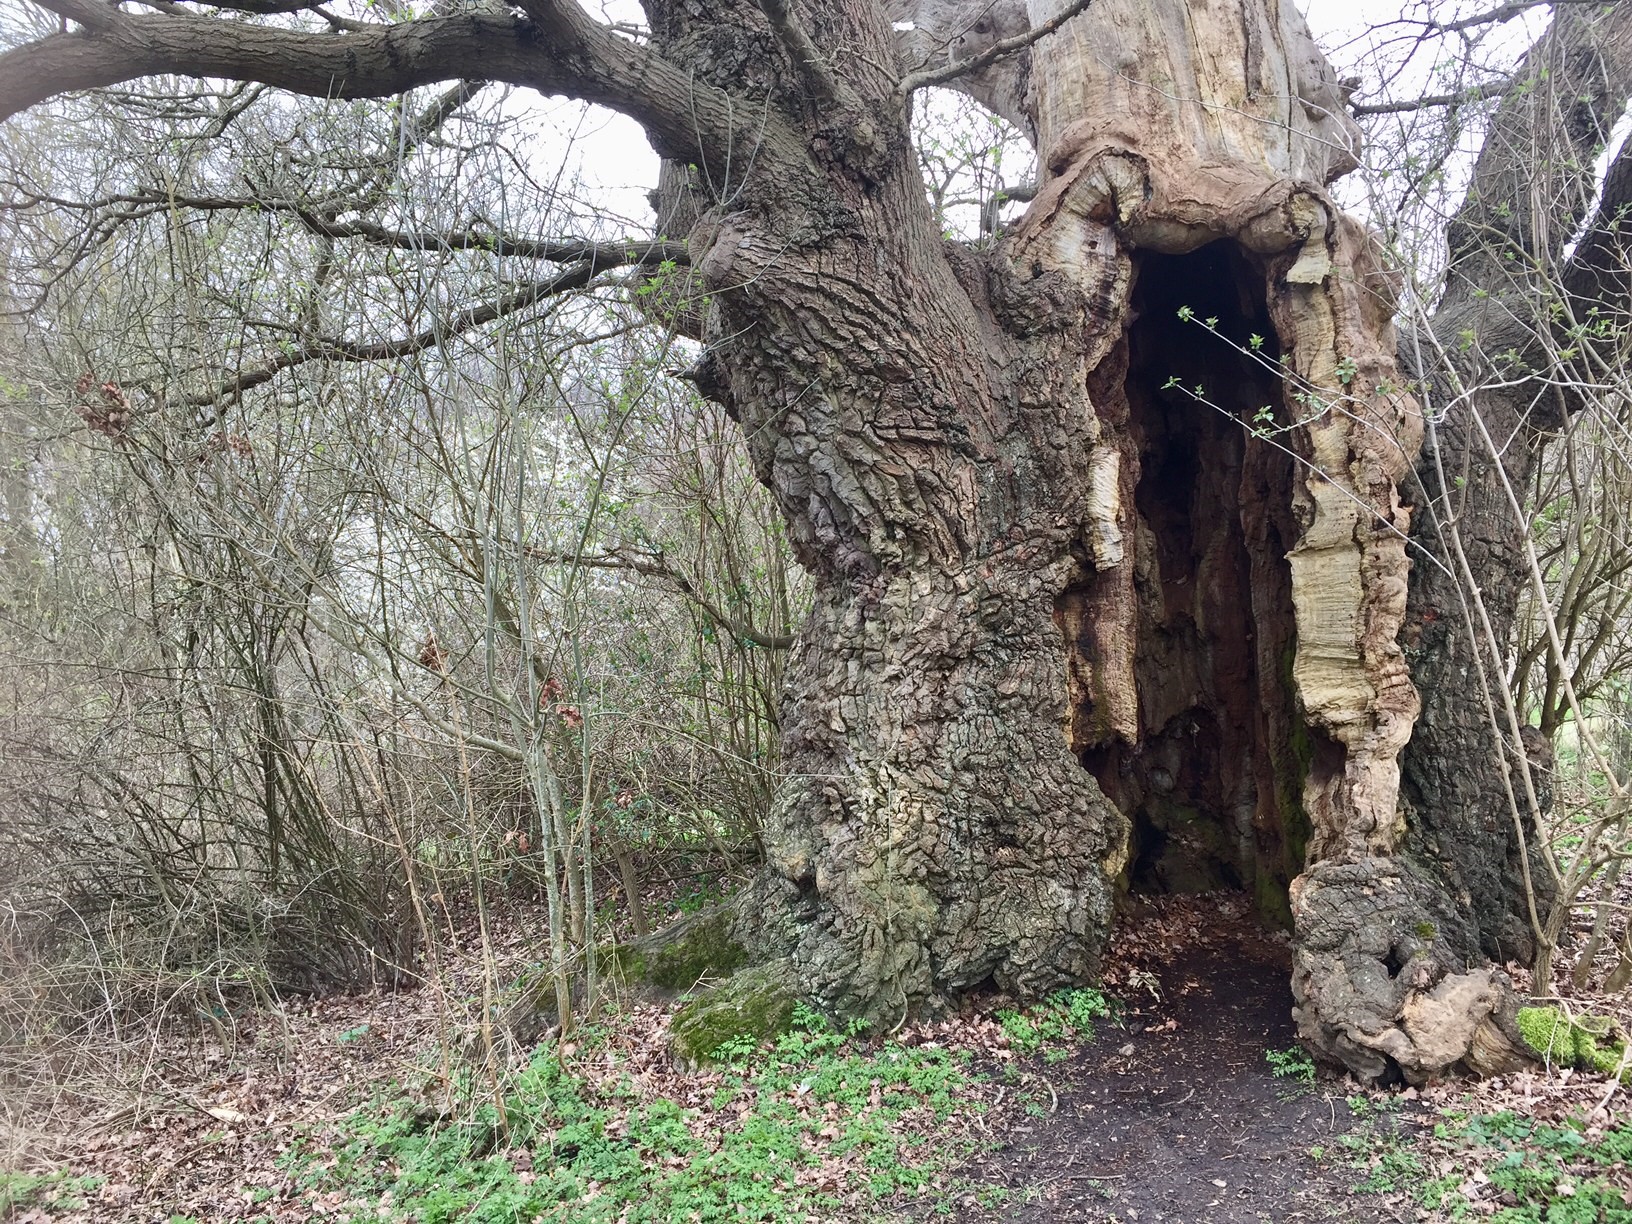 Large old tree with hollowed centre